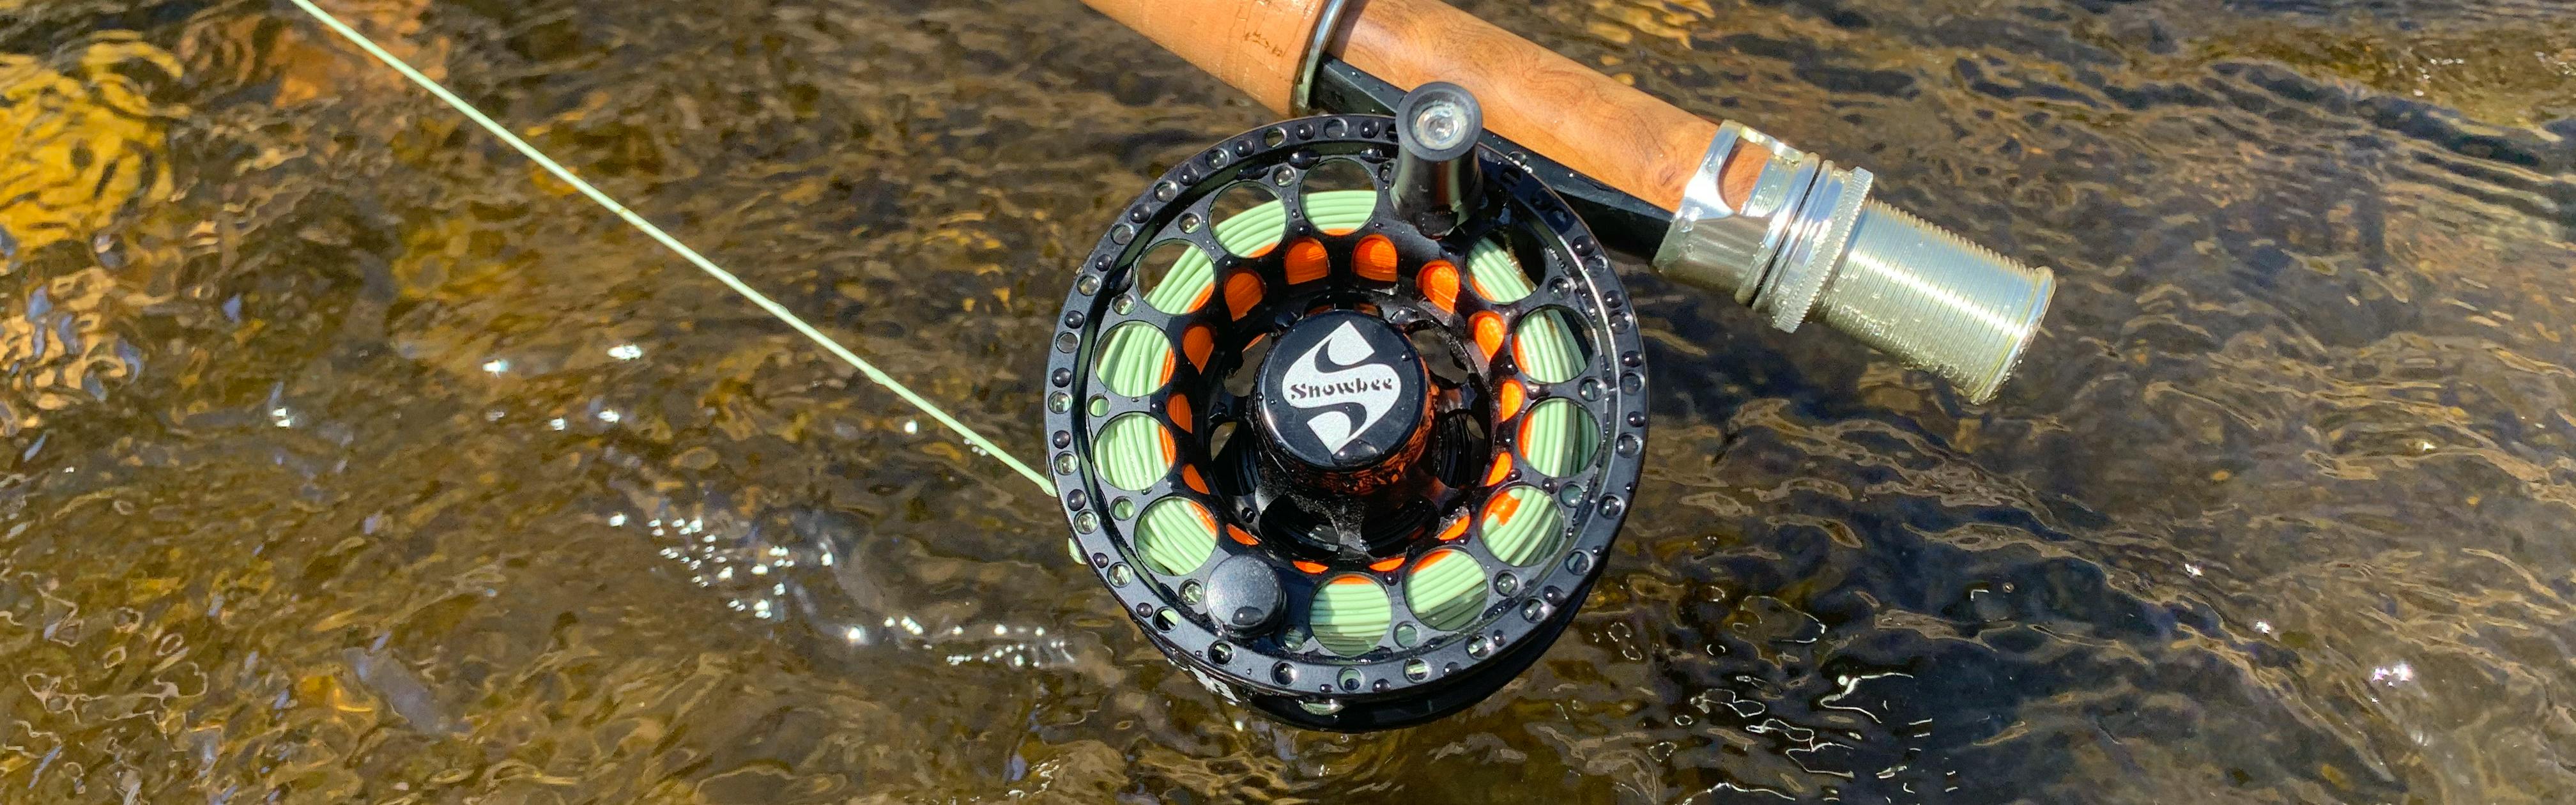 When to Replace Your Fly Fishing Gear